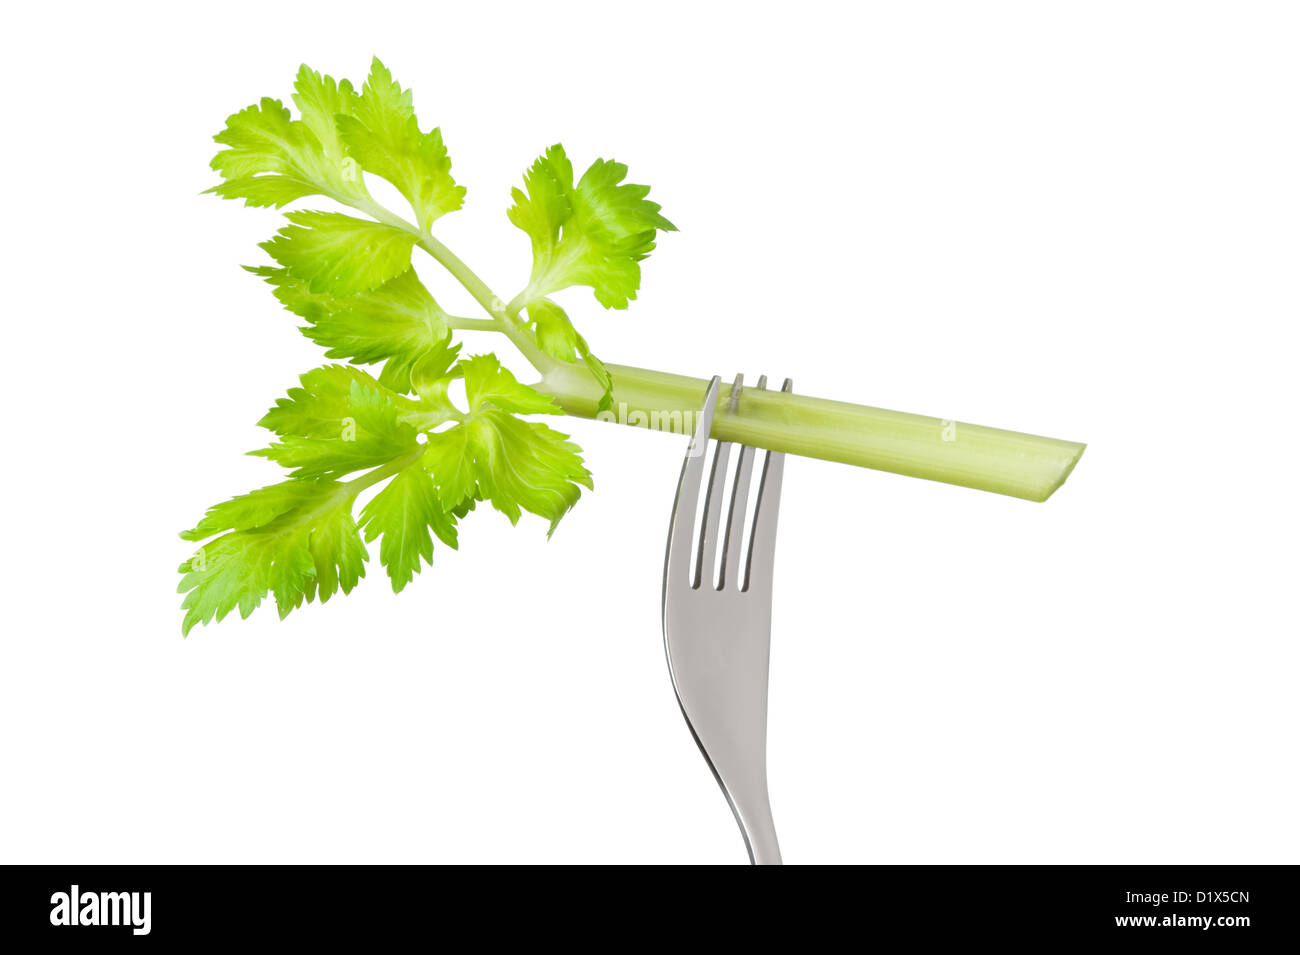 fresh celery stick or stalk on a fork isolated against a white background Stock Photo